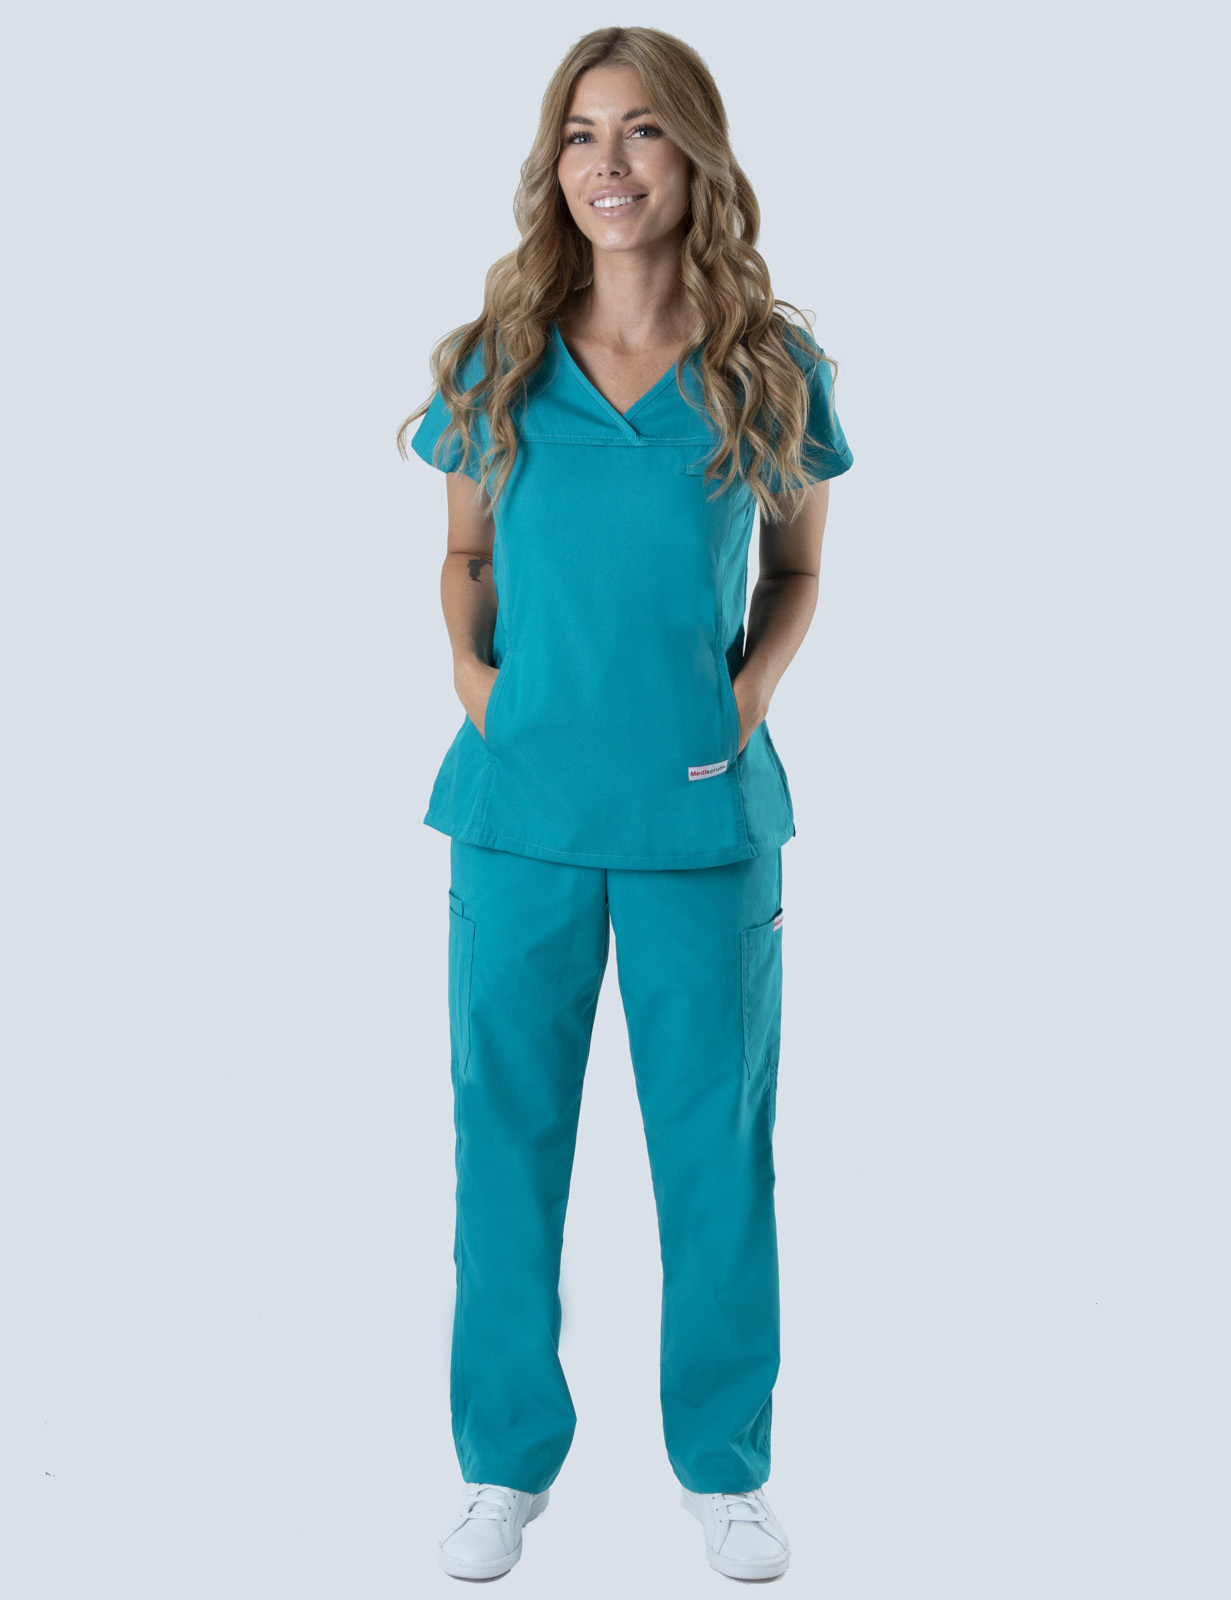 Children's Hospital Melbourne - ED (Women's Fit Solid Scrub Top and Cargo Pants in Teal incl Logos)